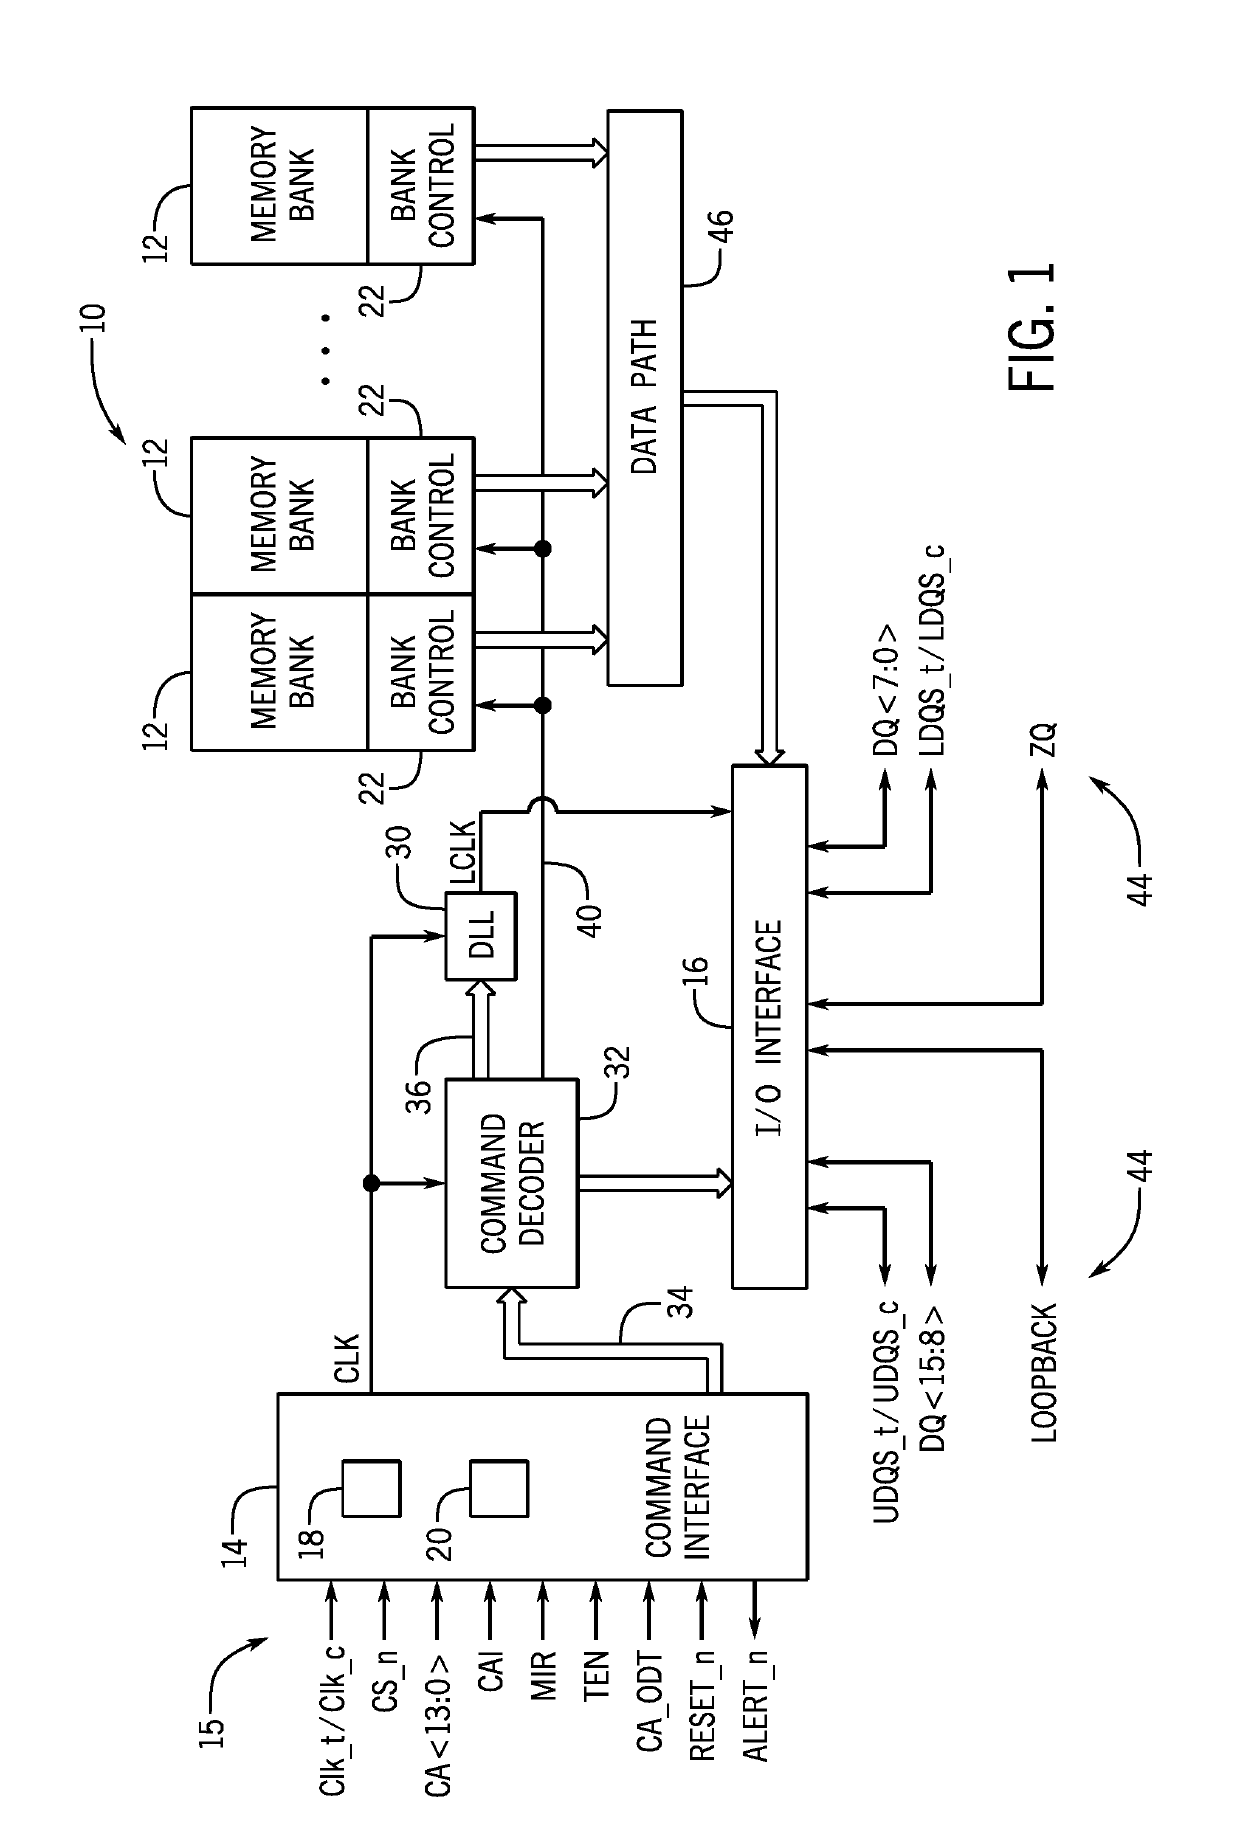 Systems and methods for performing row hammer refresh operations in redundant memory